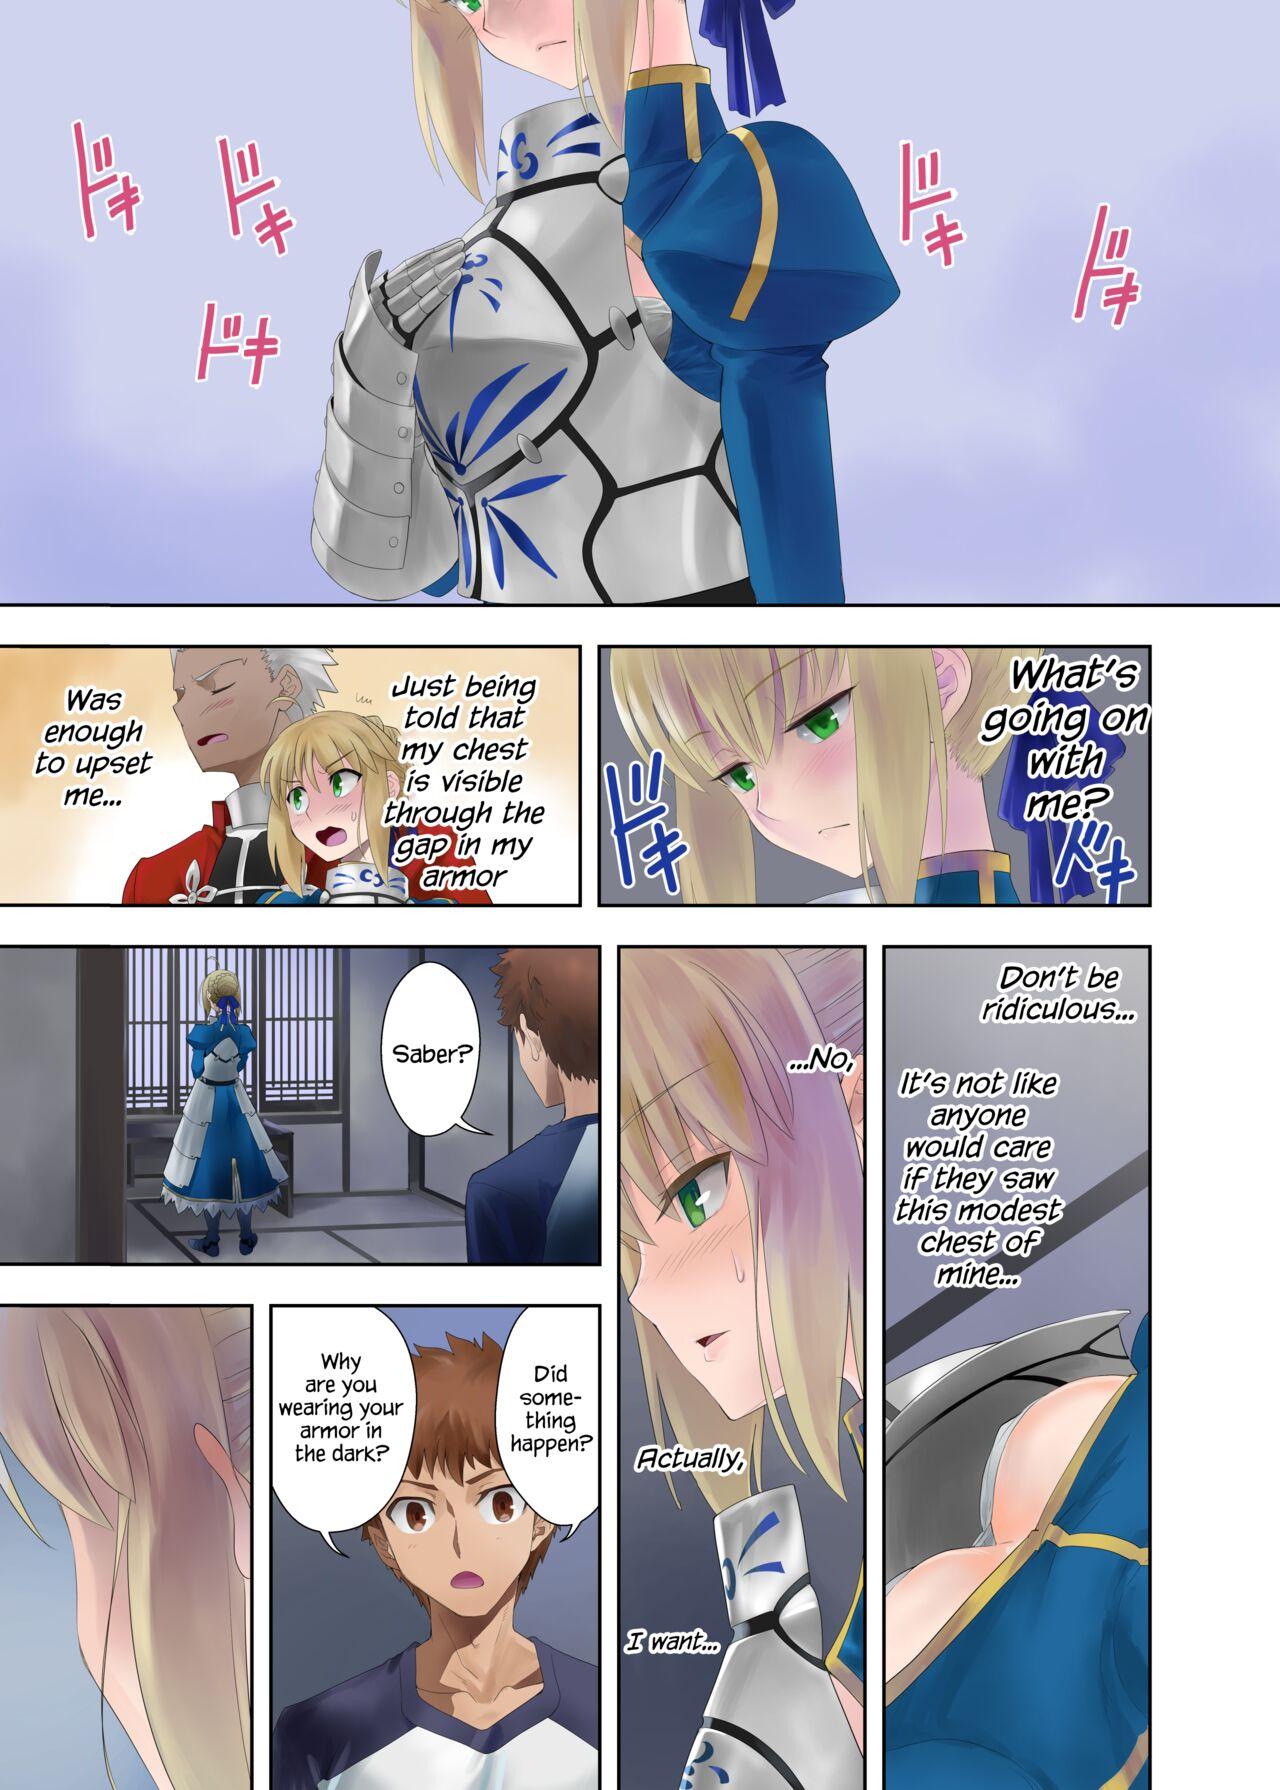 Culazo flowers - Fate stay night Hot Wife - Page 2